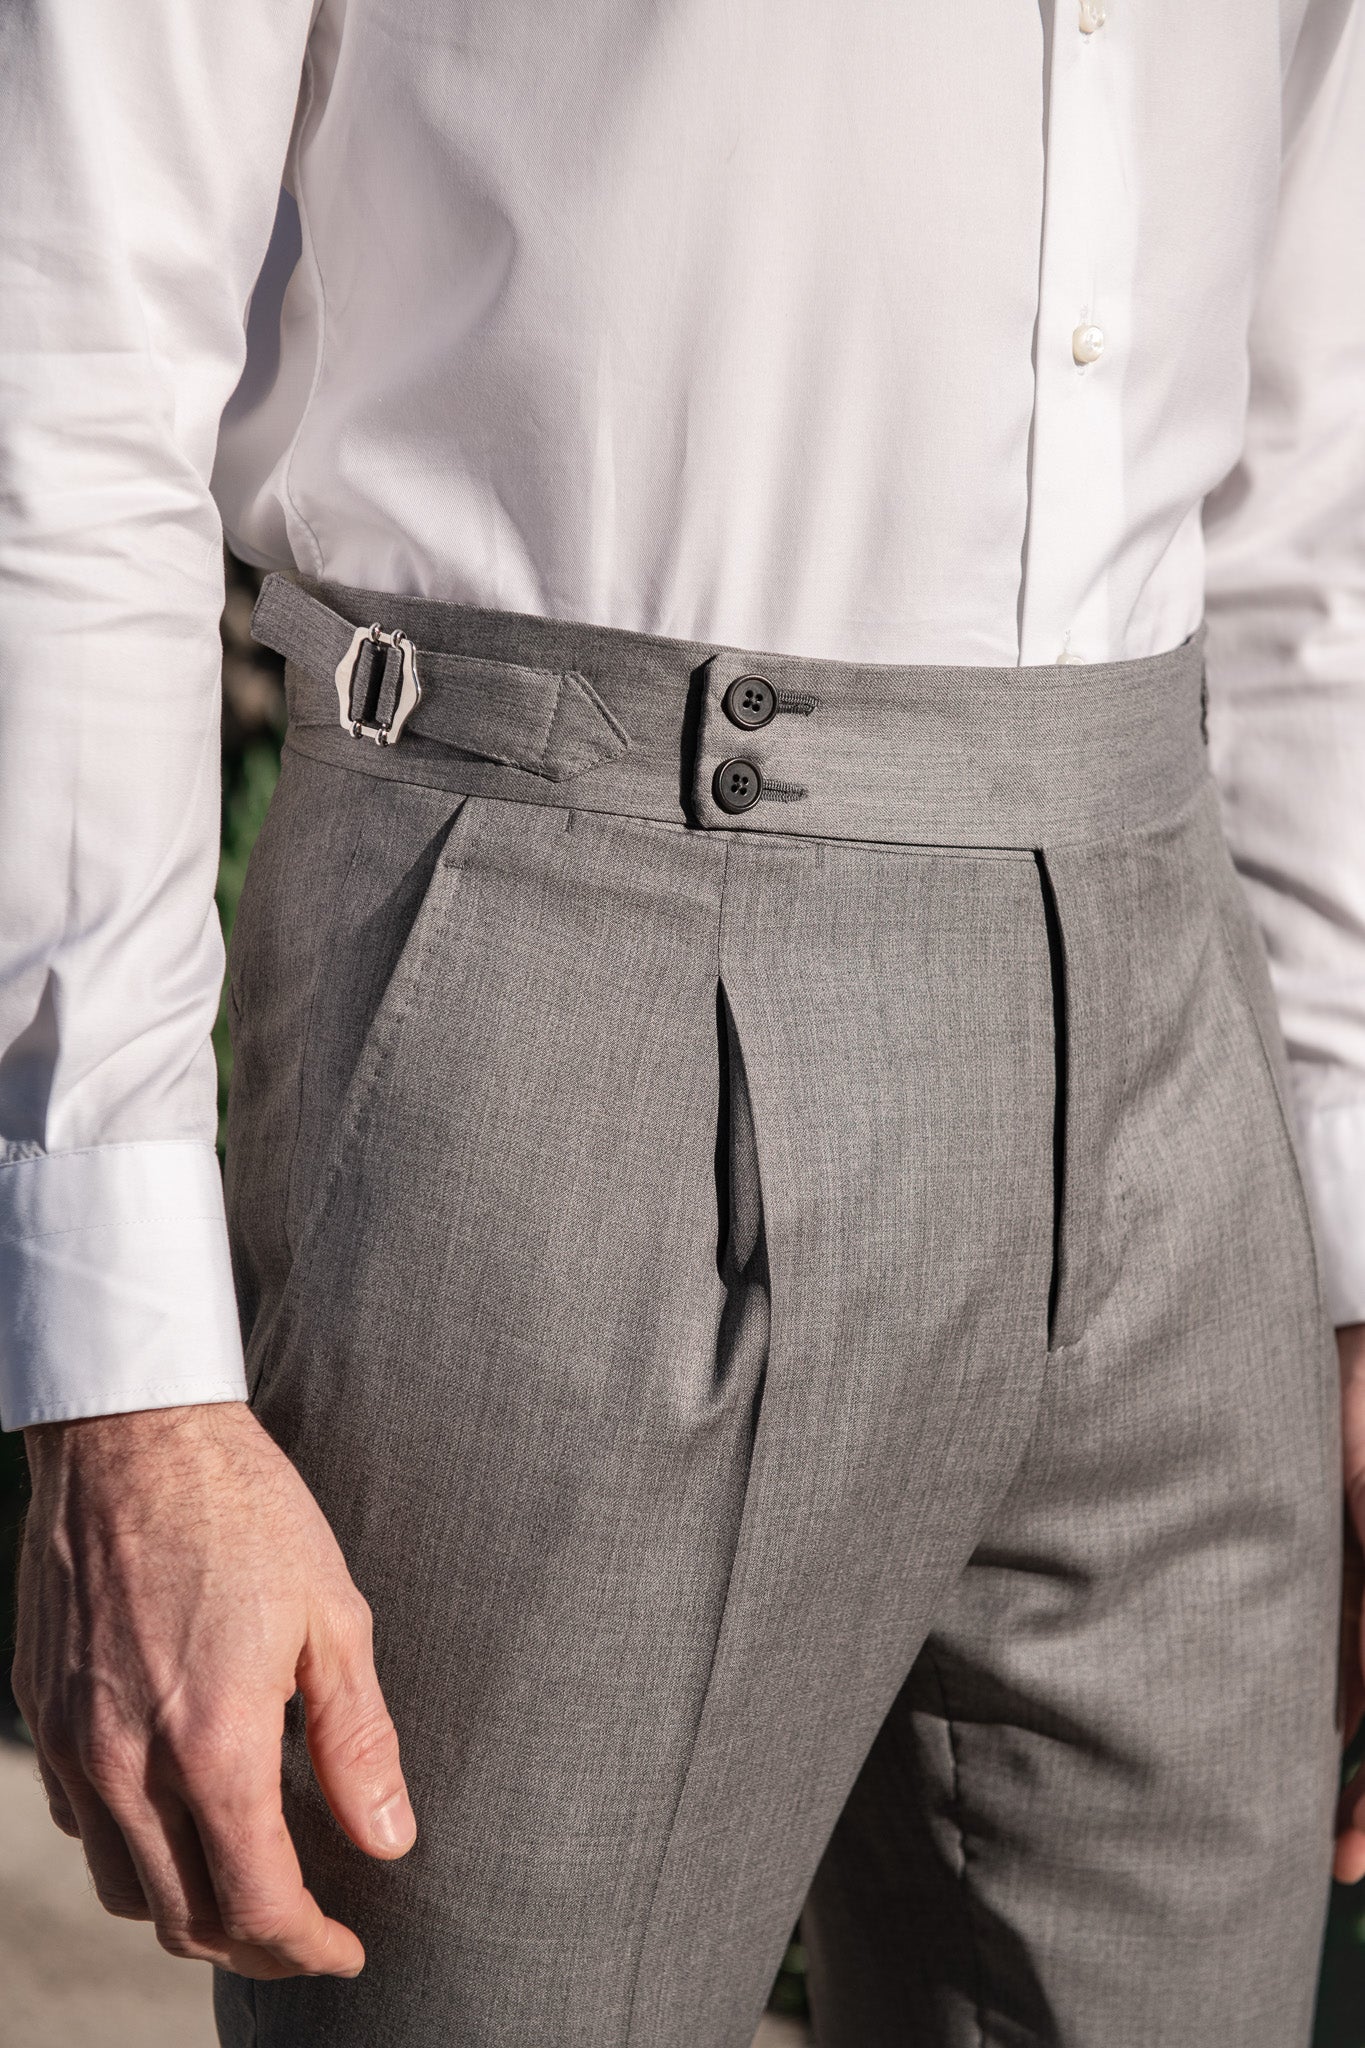 Grey Trousers "Soragna Capsule Collection" - Made in Italy